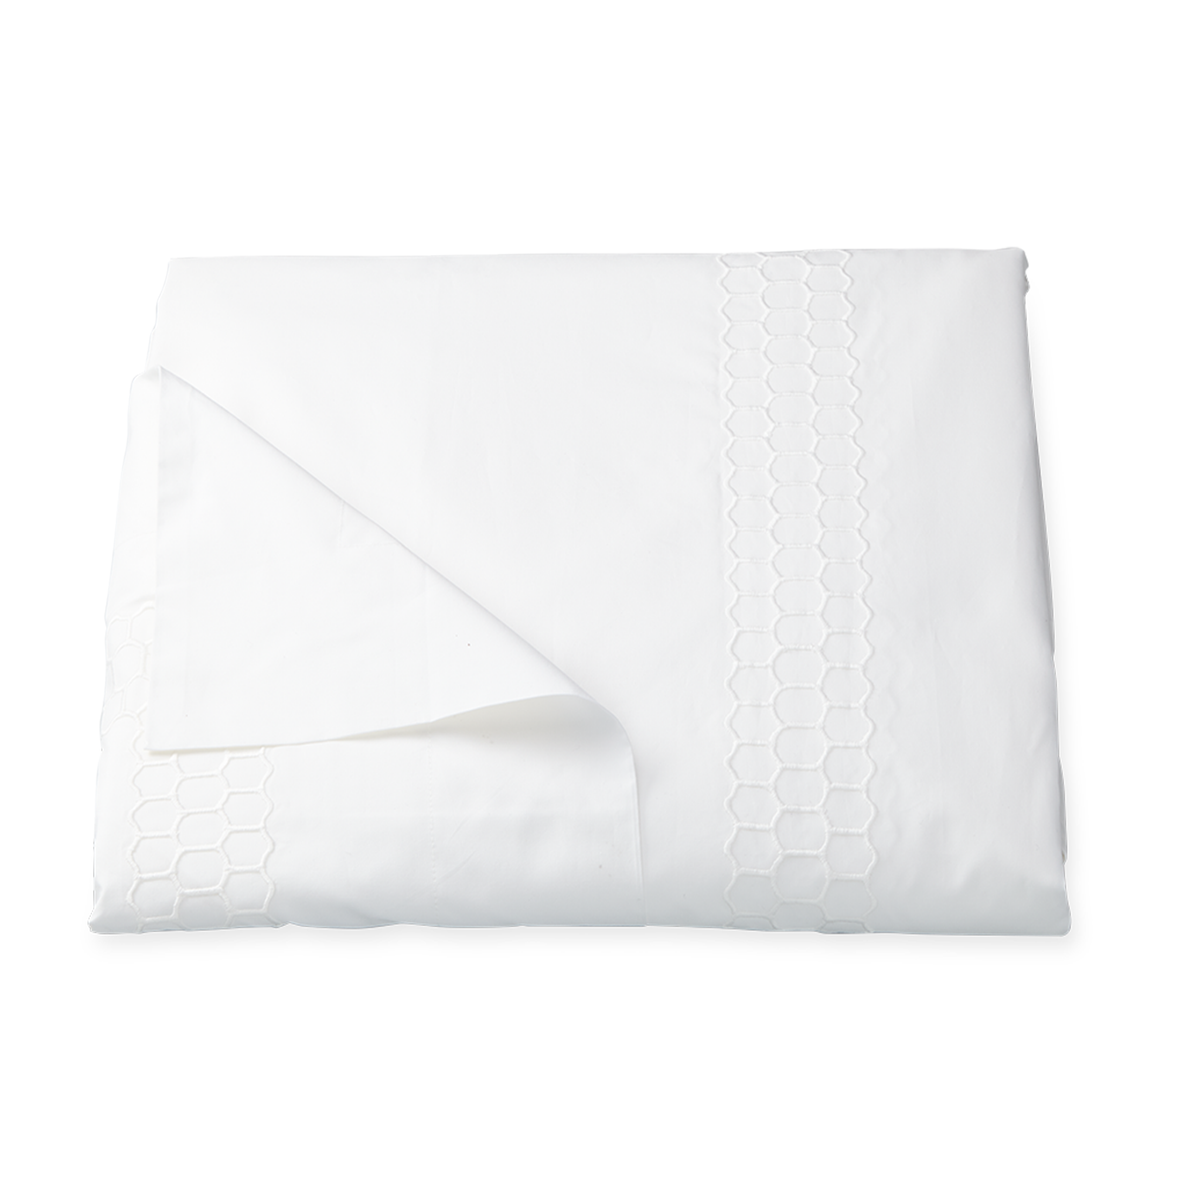 Clear Image of Matouk Liana Bedding Duvet Cover in White Color